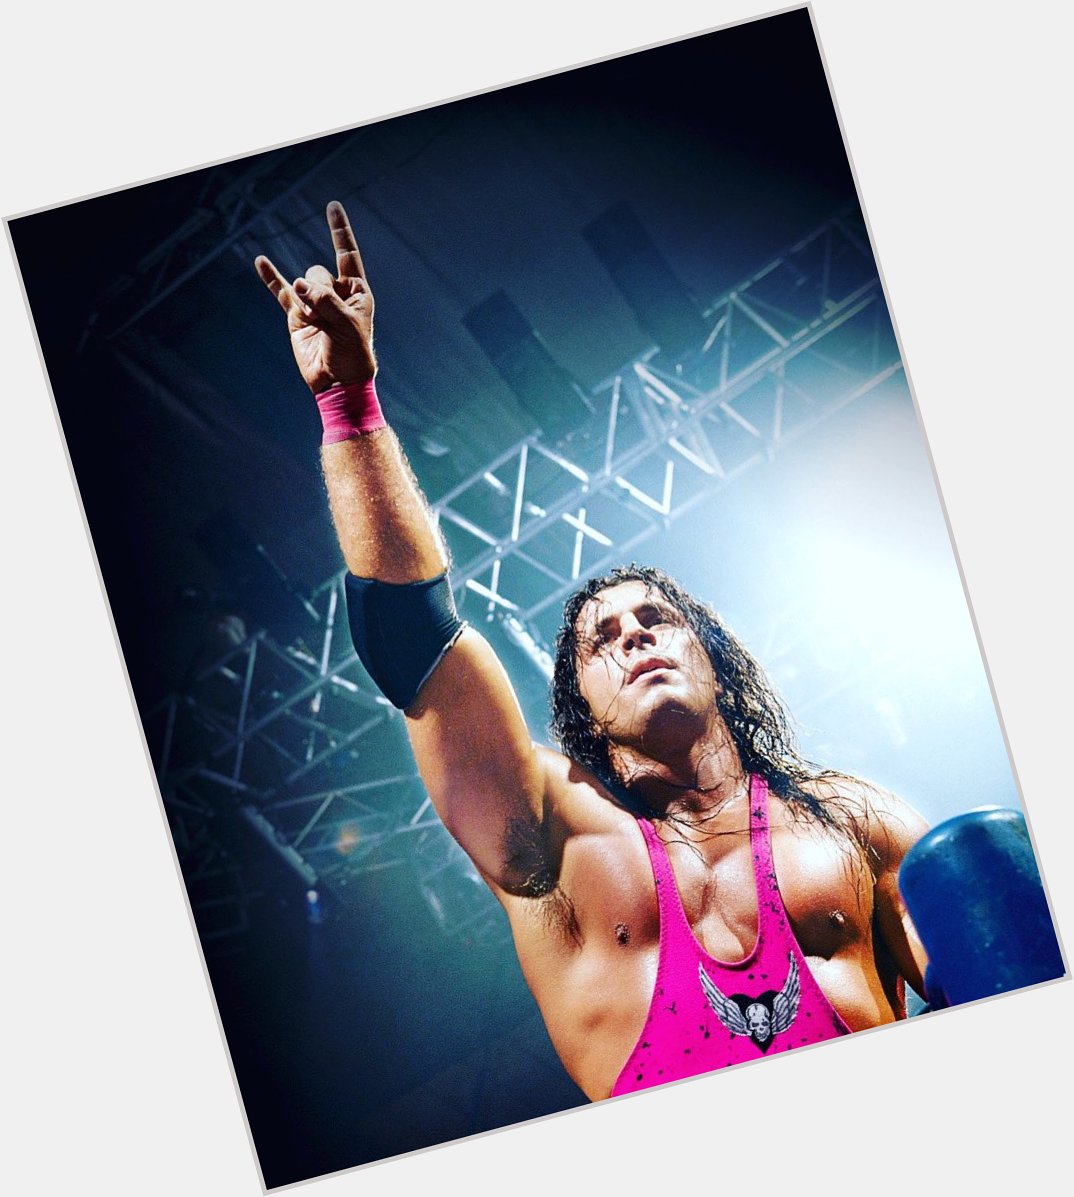 Happy birthday to the greatest in ring performer of all time Bret hart 